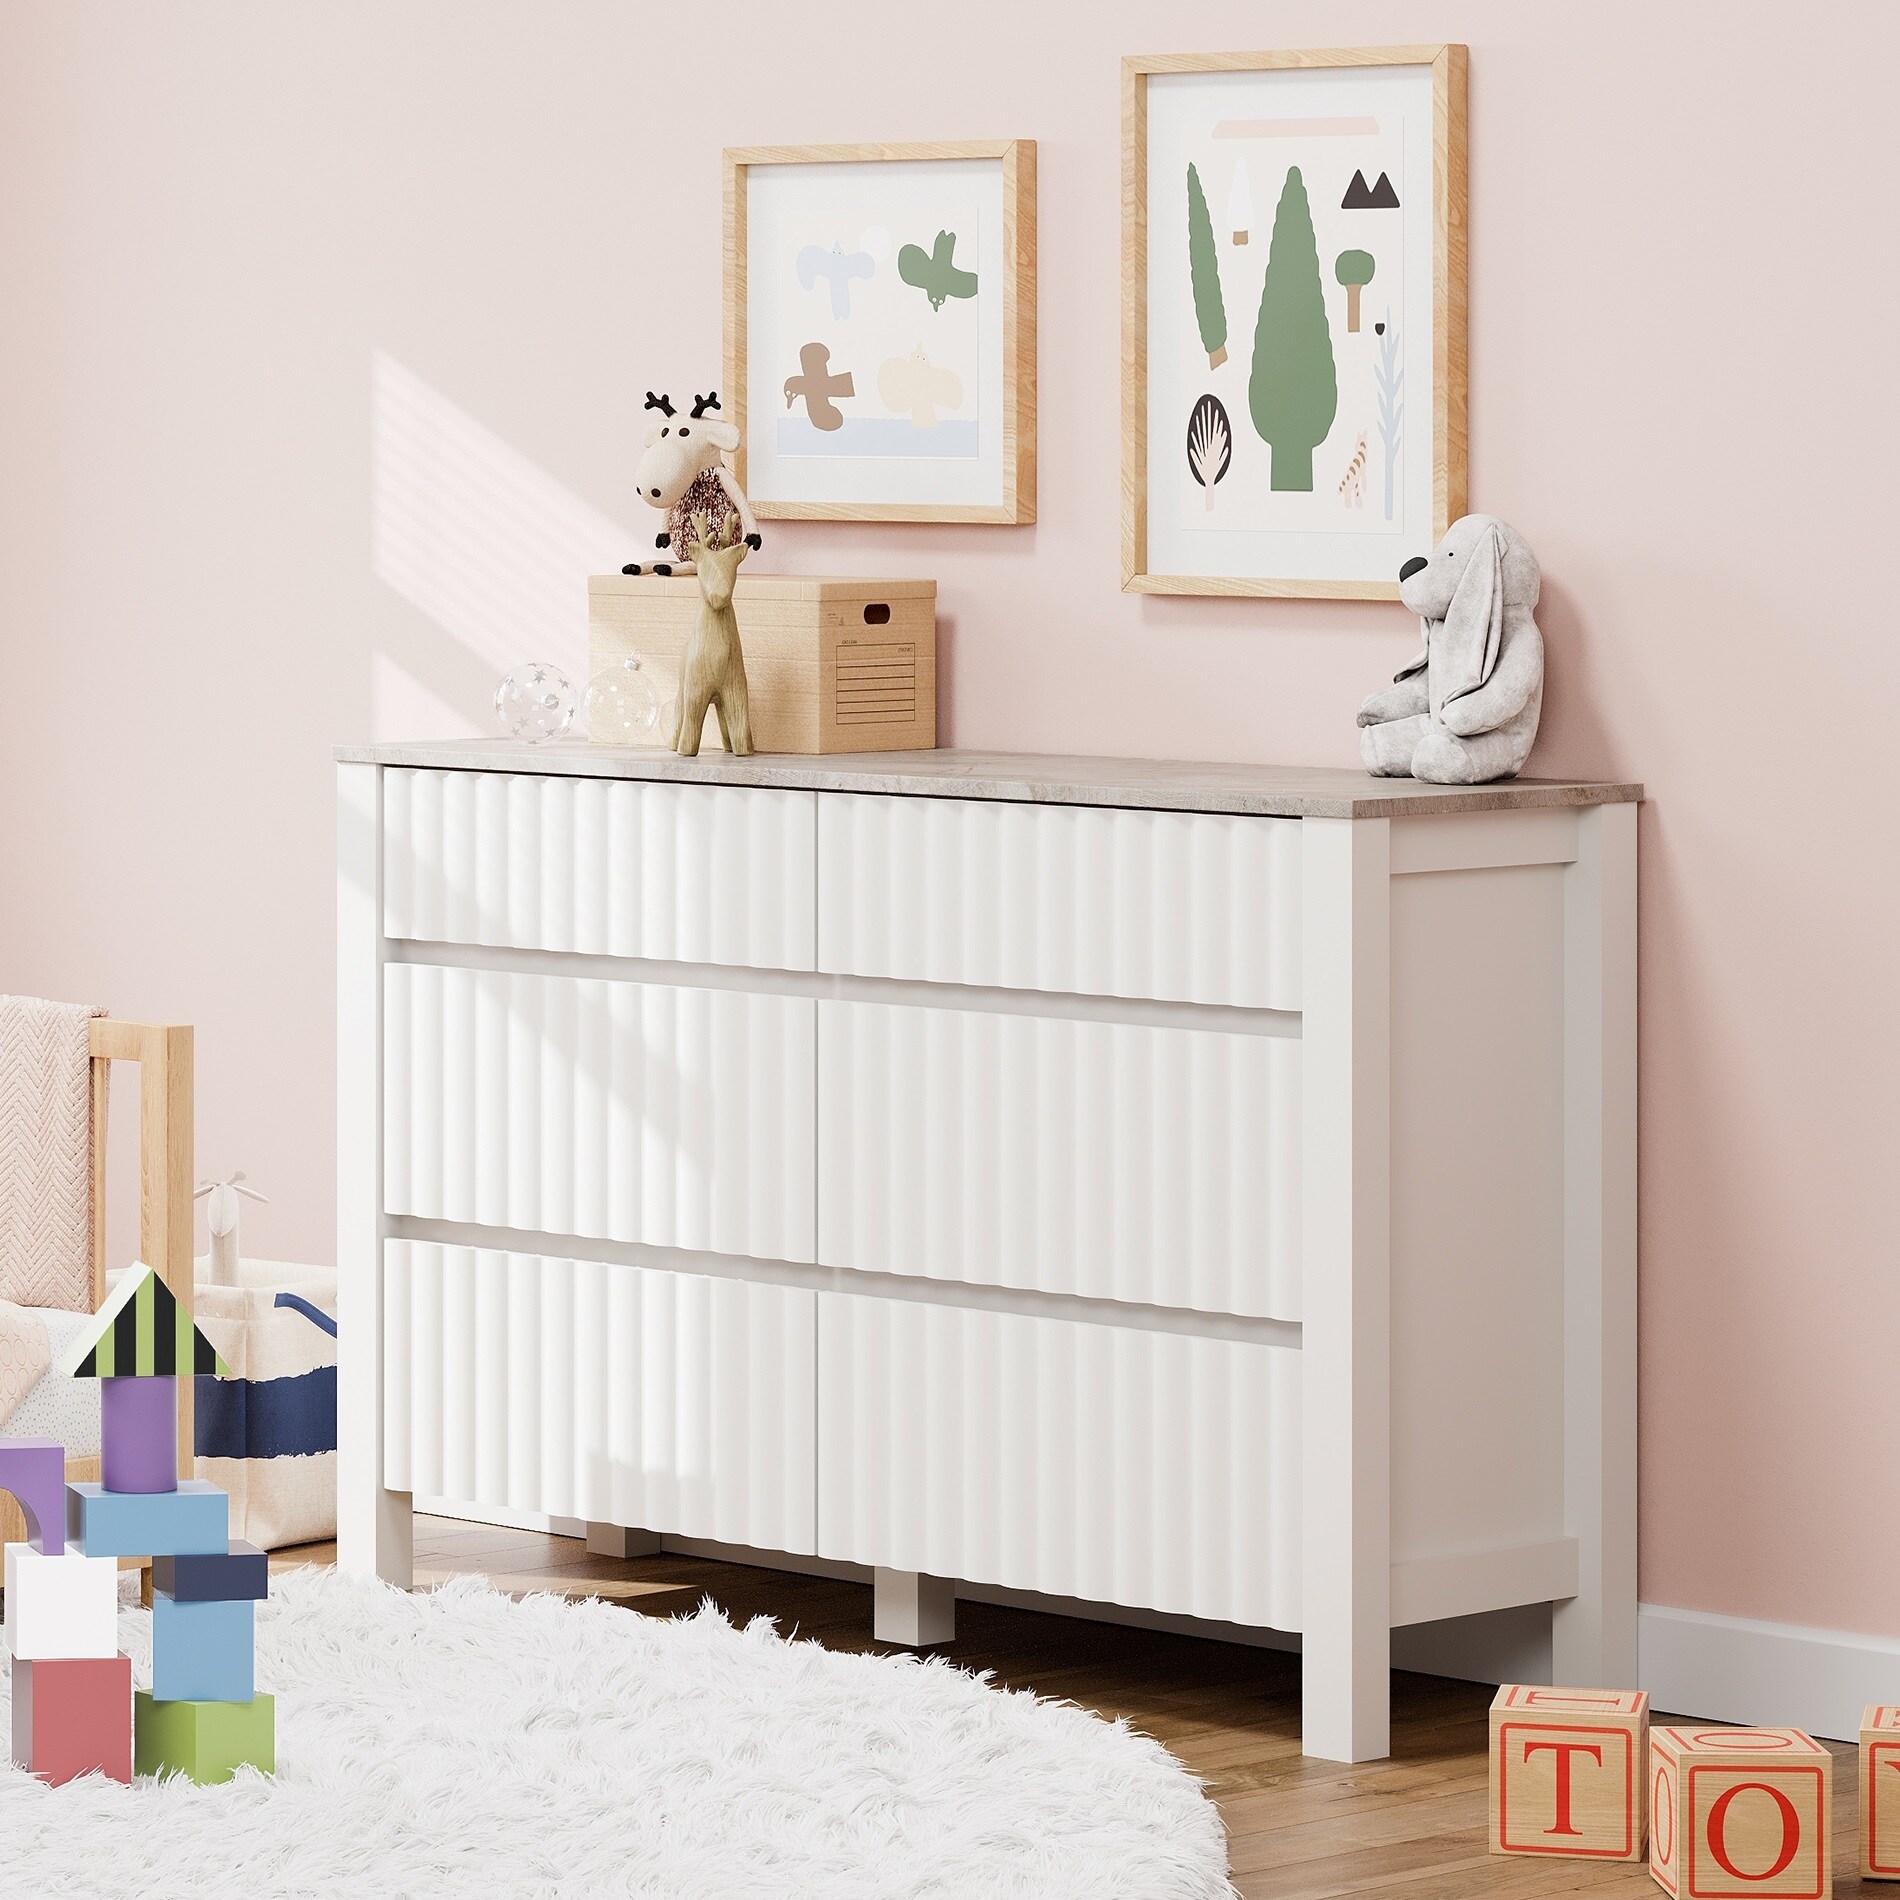 WAMPAT 34 Dresser for Bedroom with 3 Drawers, White Kids Dressers wit